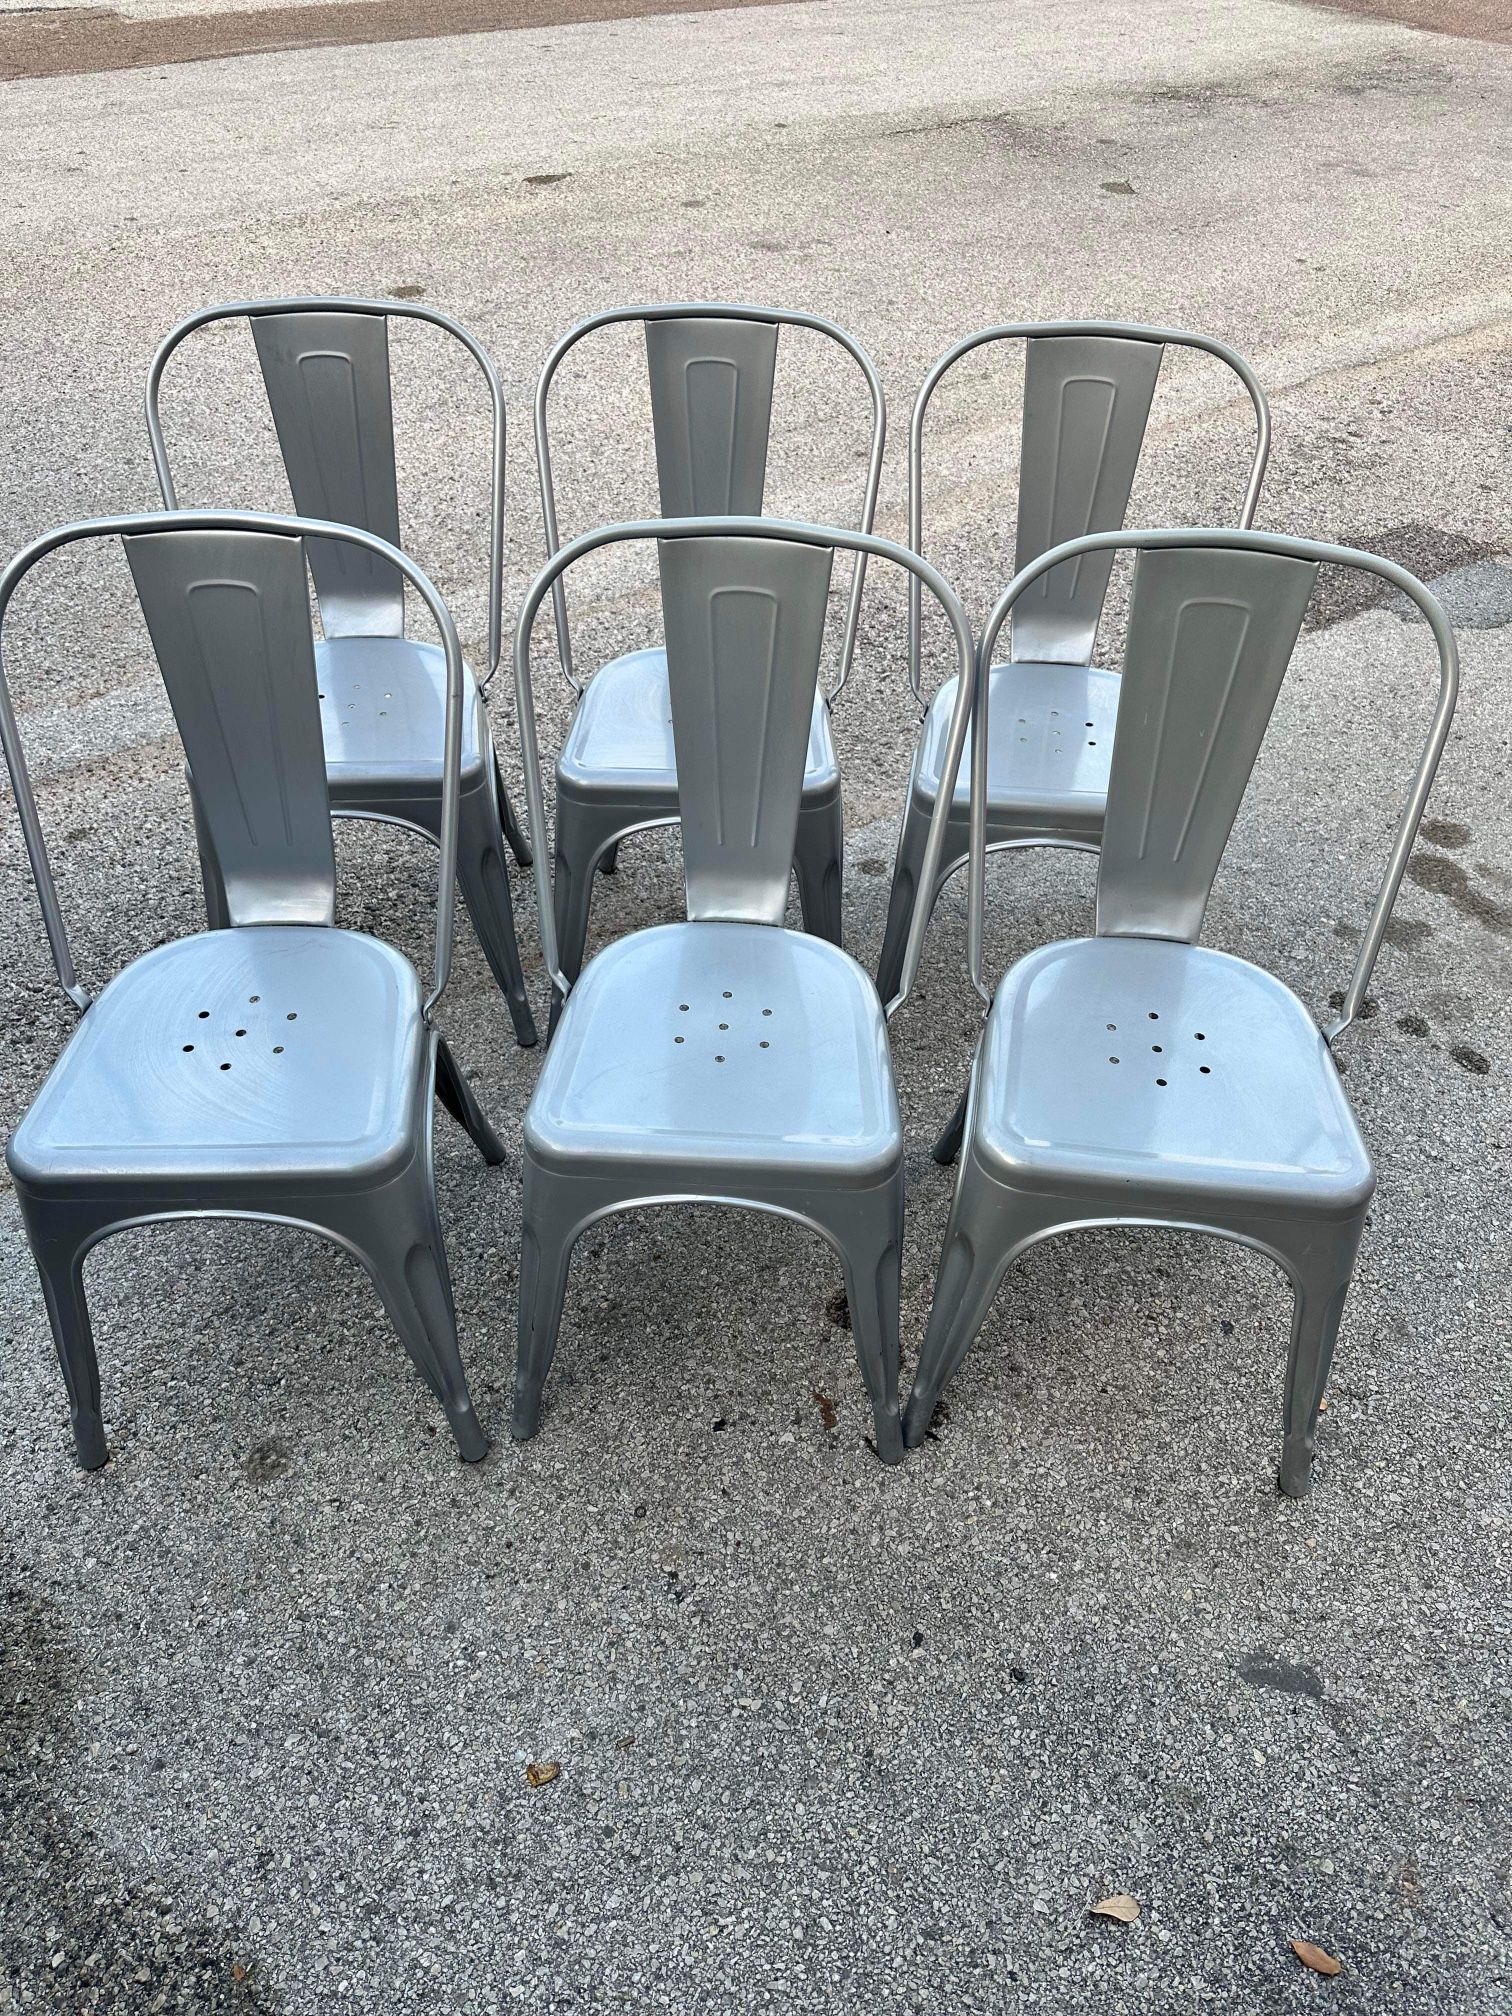 Metal Dining Chairs For 6 